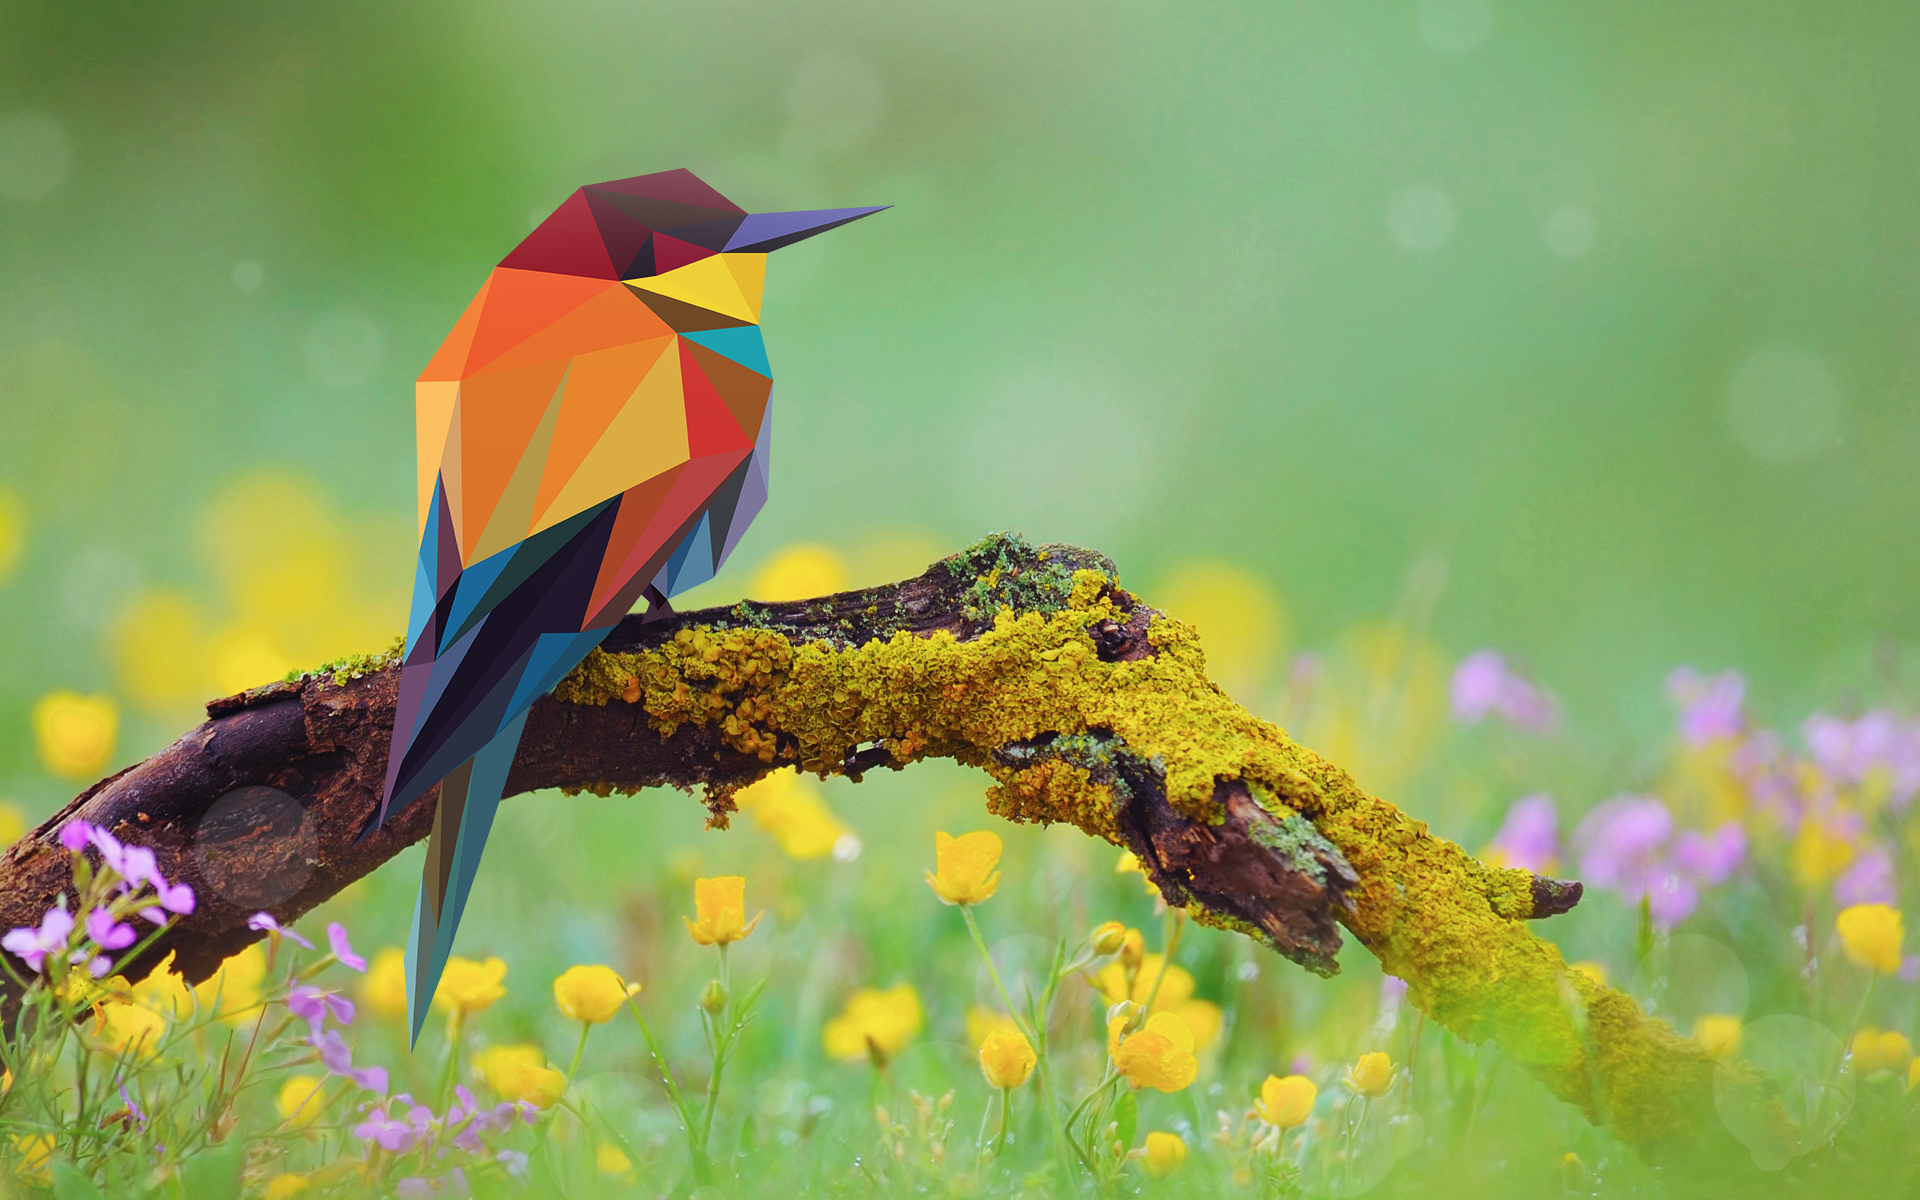 2d Low Poly Bird On A Branch I